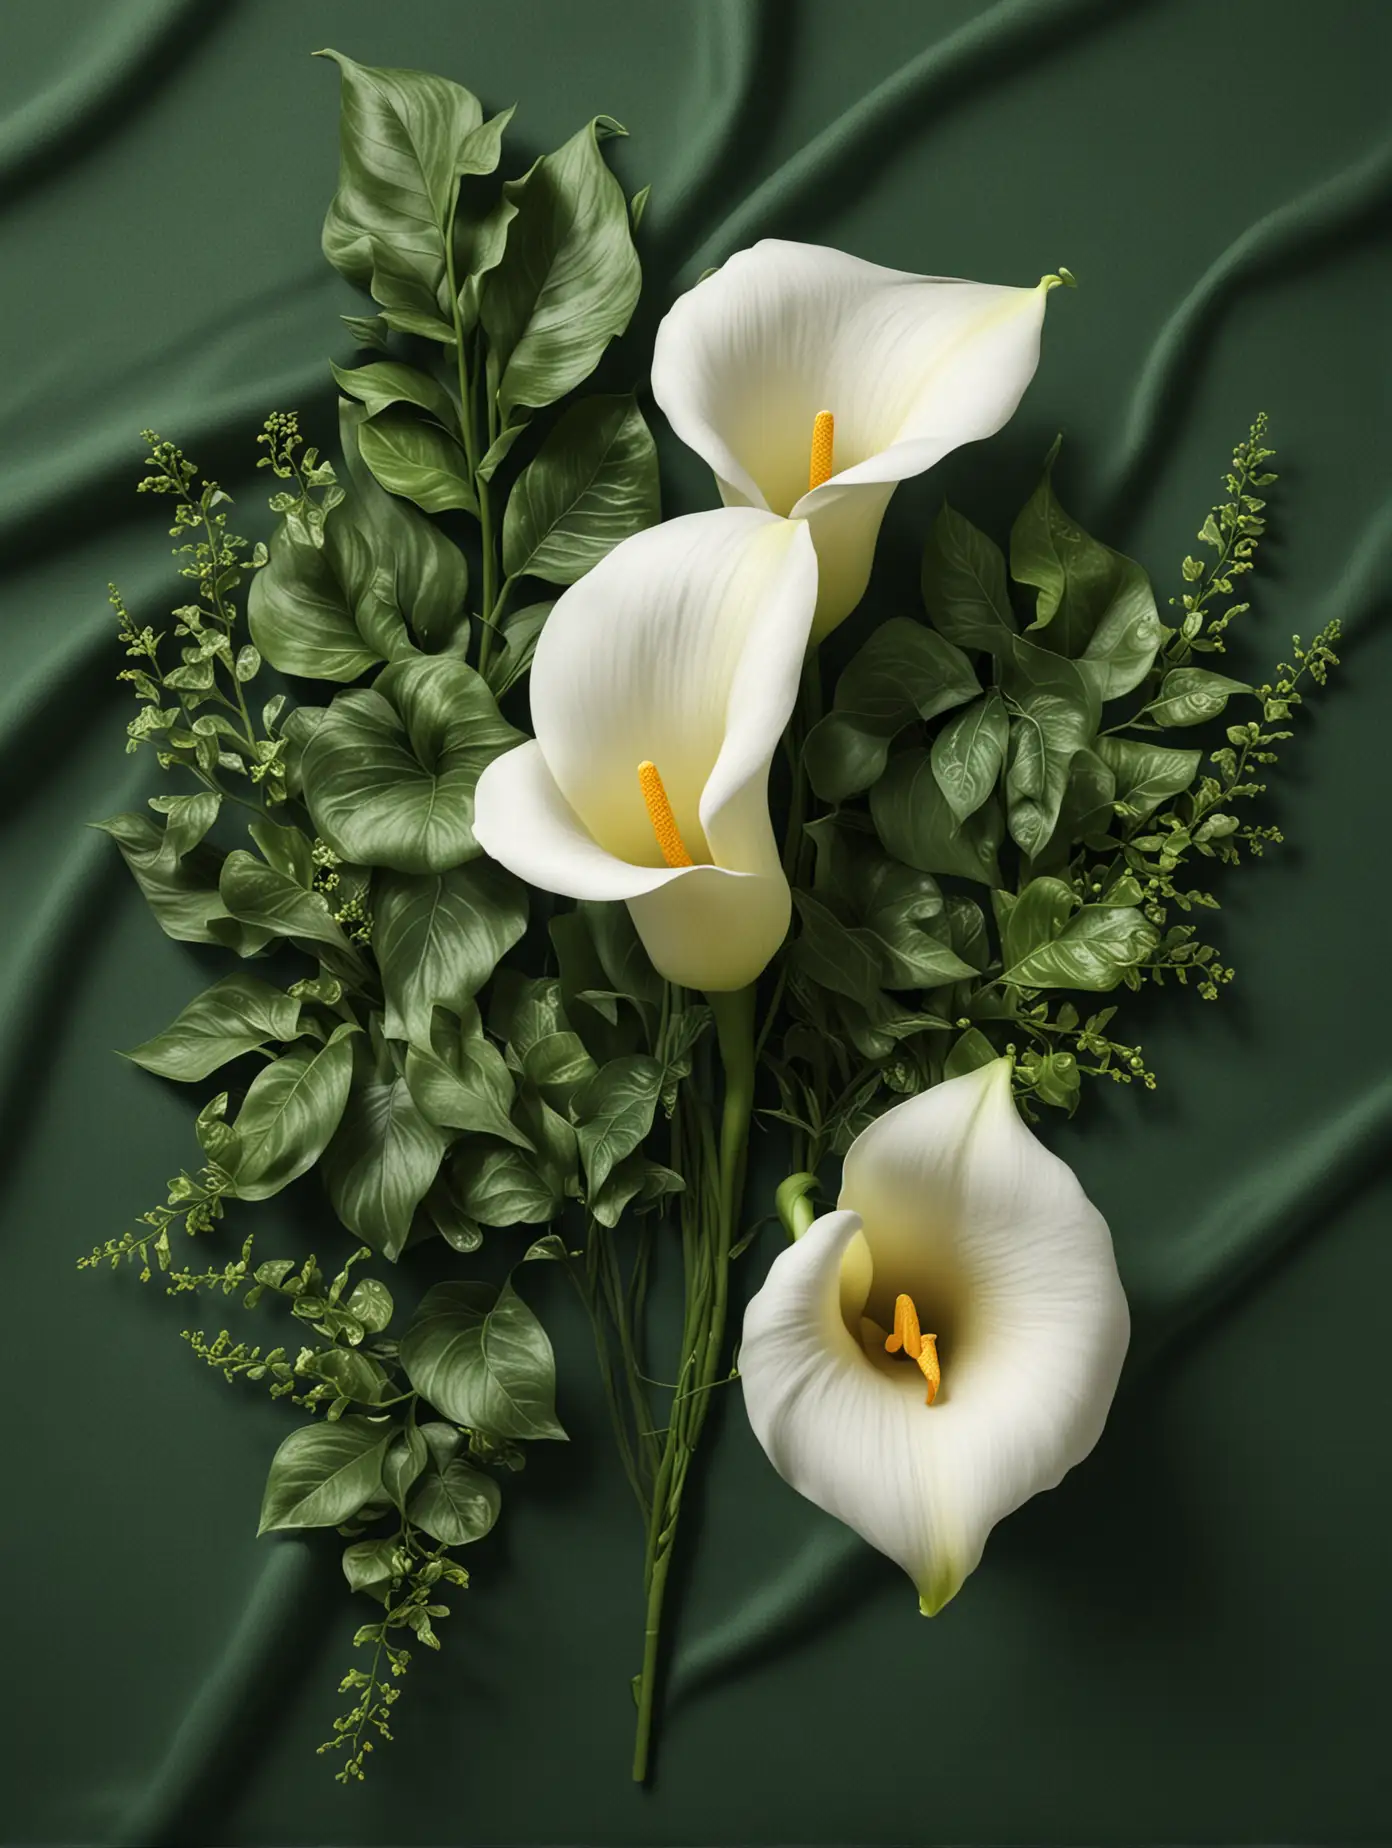 Hyperrealistic calla and swirling ivy lying on green fabric